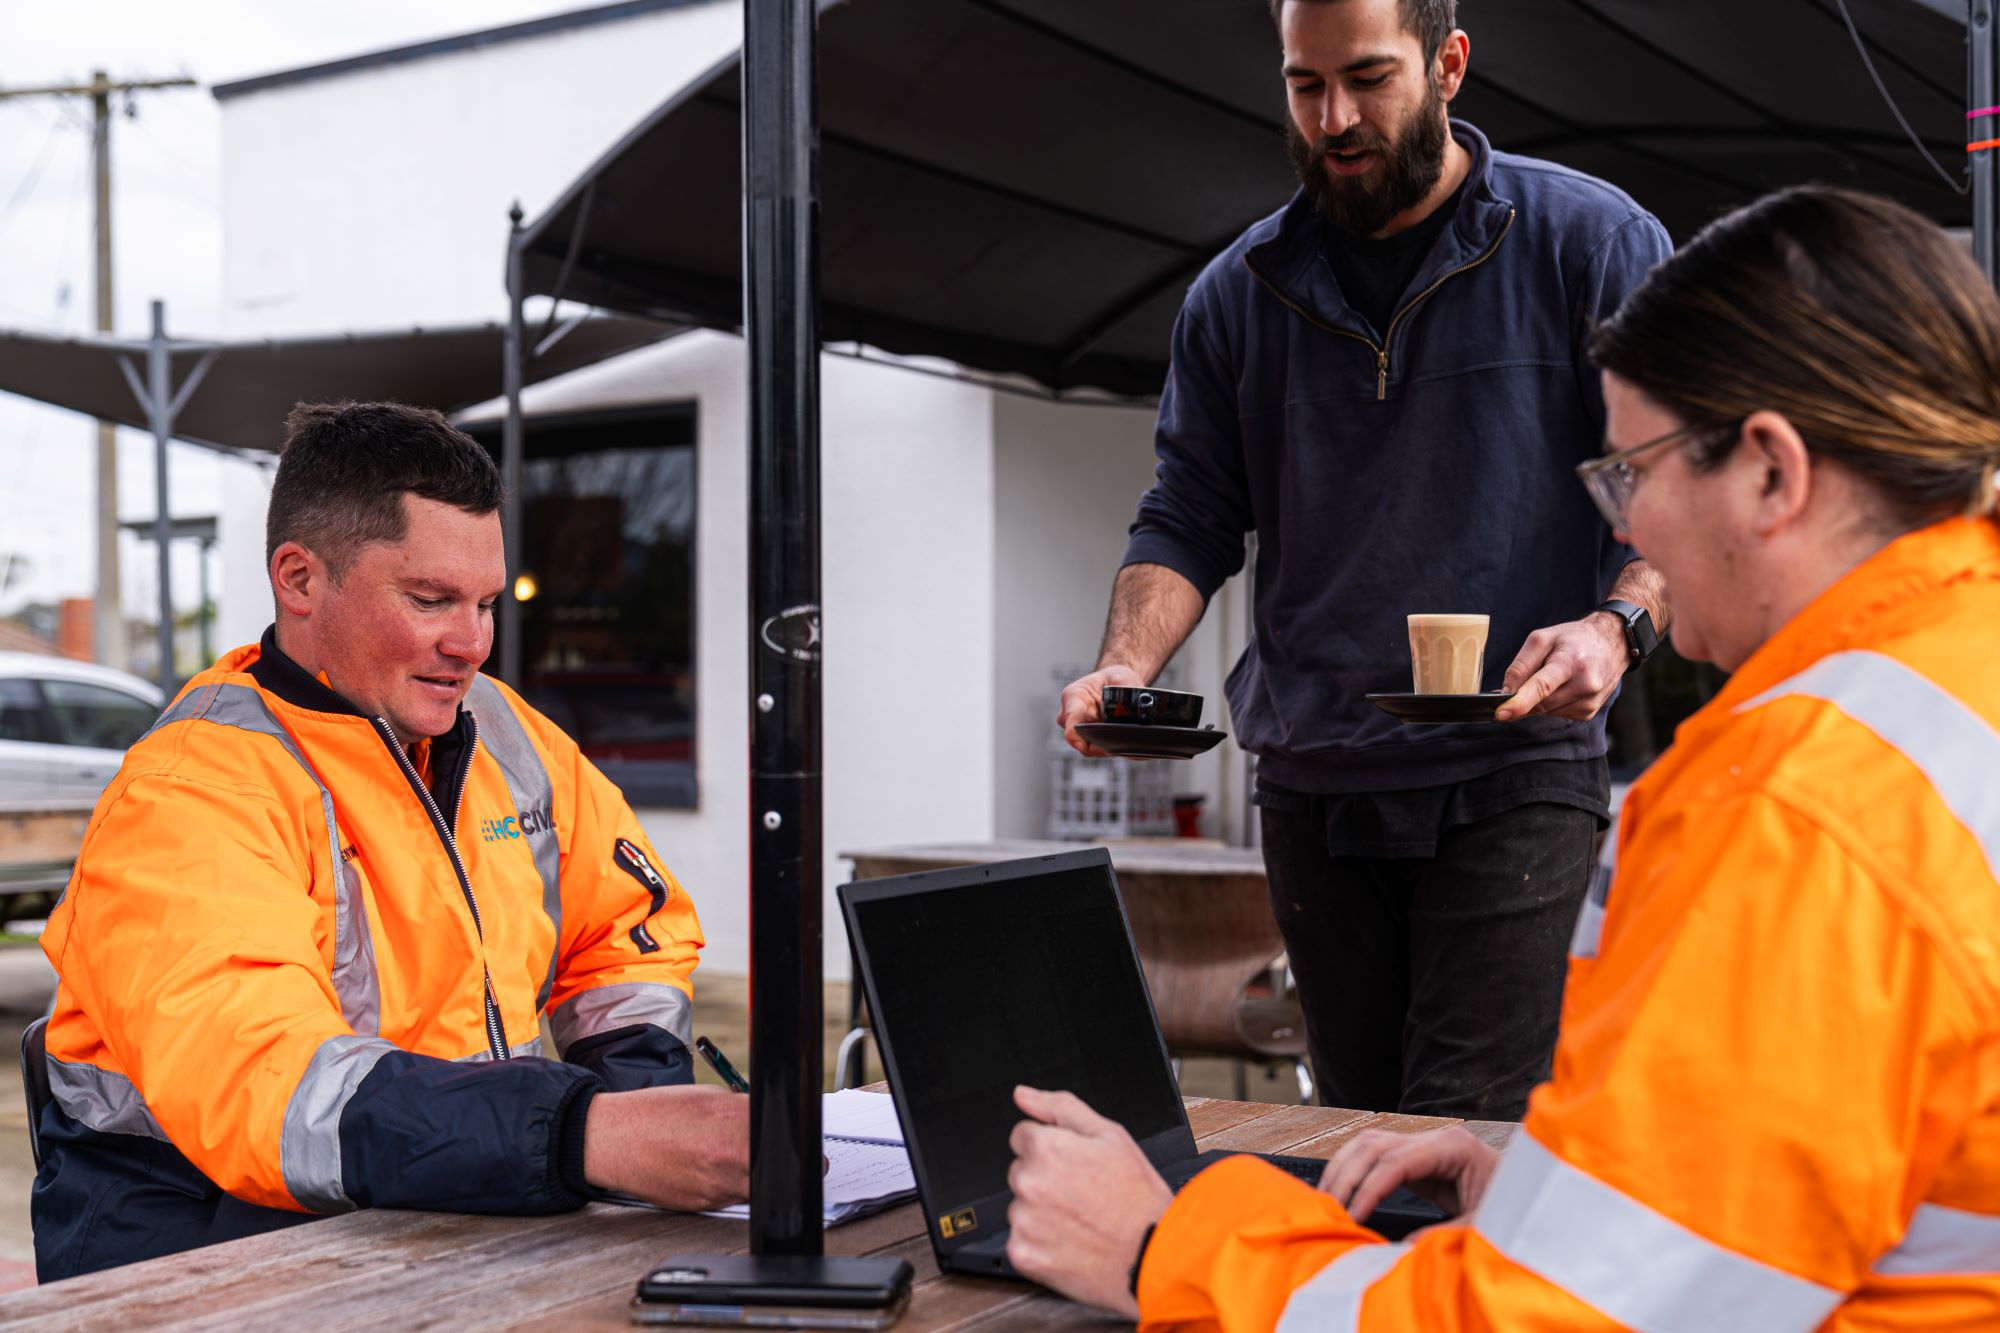 Two Inland Rail workers having a meeting at a local coffee shop in Wangaratta.